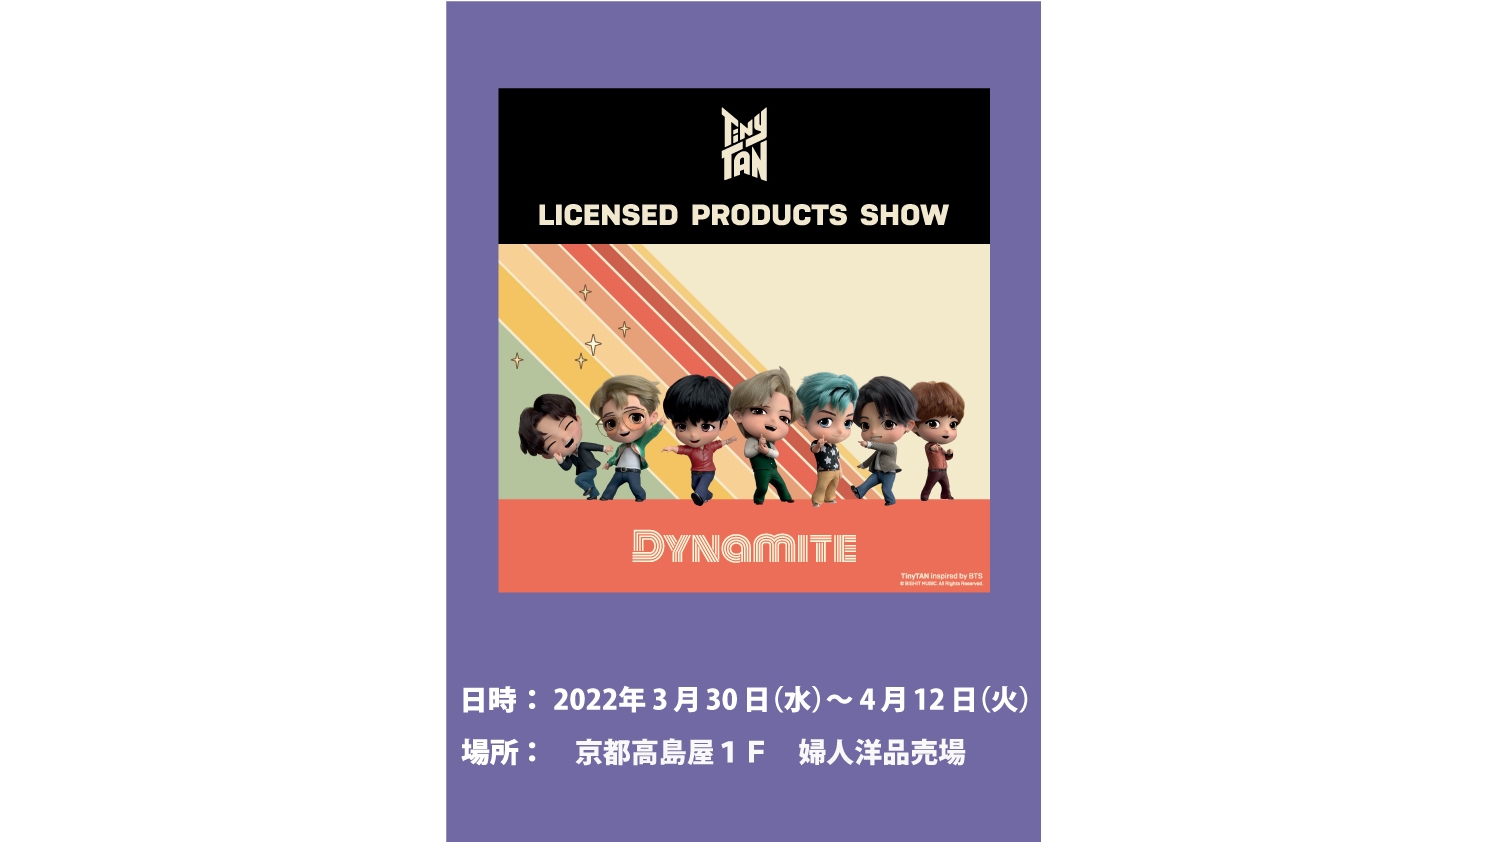 bts-licensed-products-show1